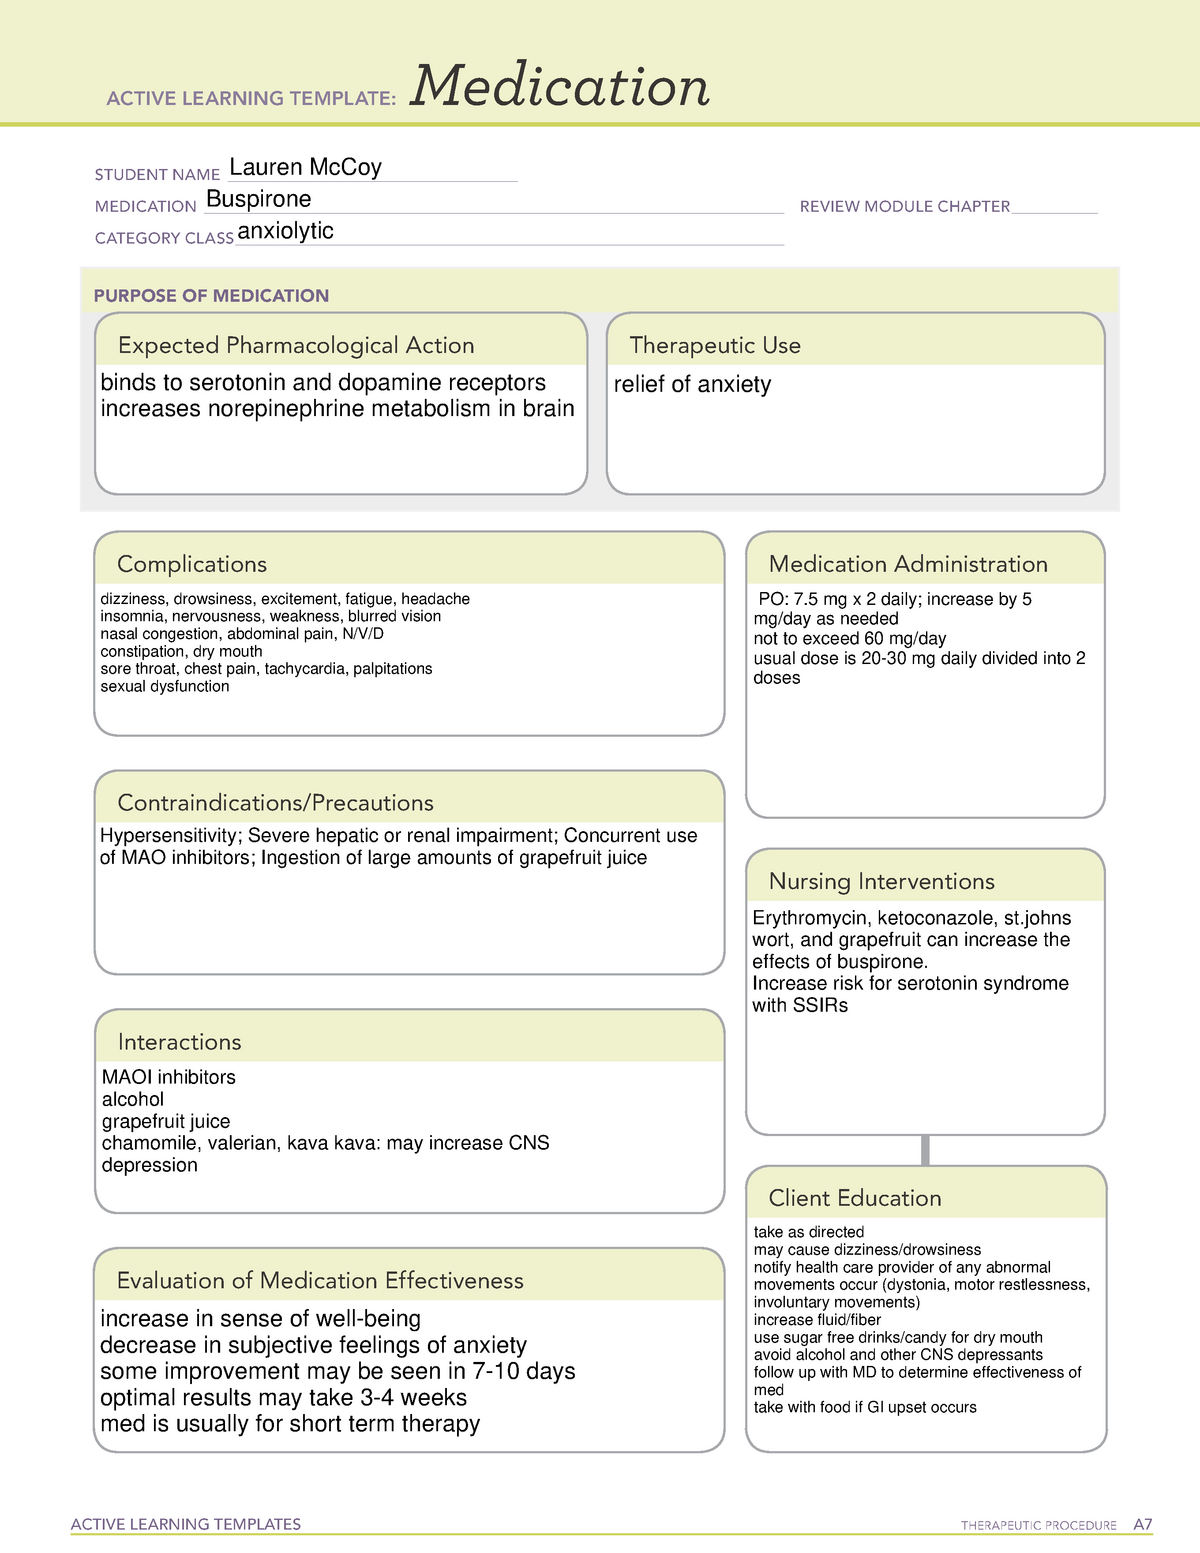 Buspirone medication ati ACTIVE LEARNING TEMPLATES THERAPEUTIC